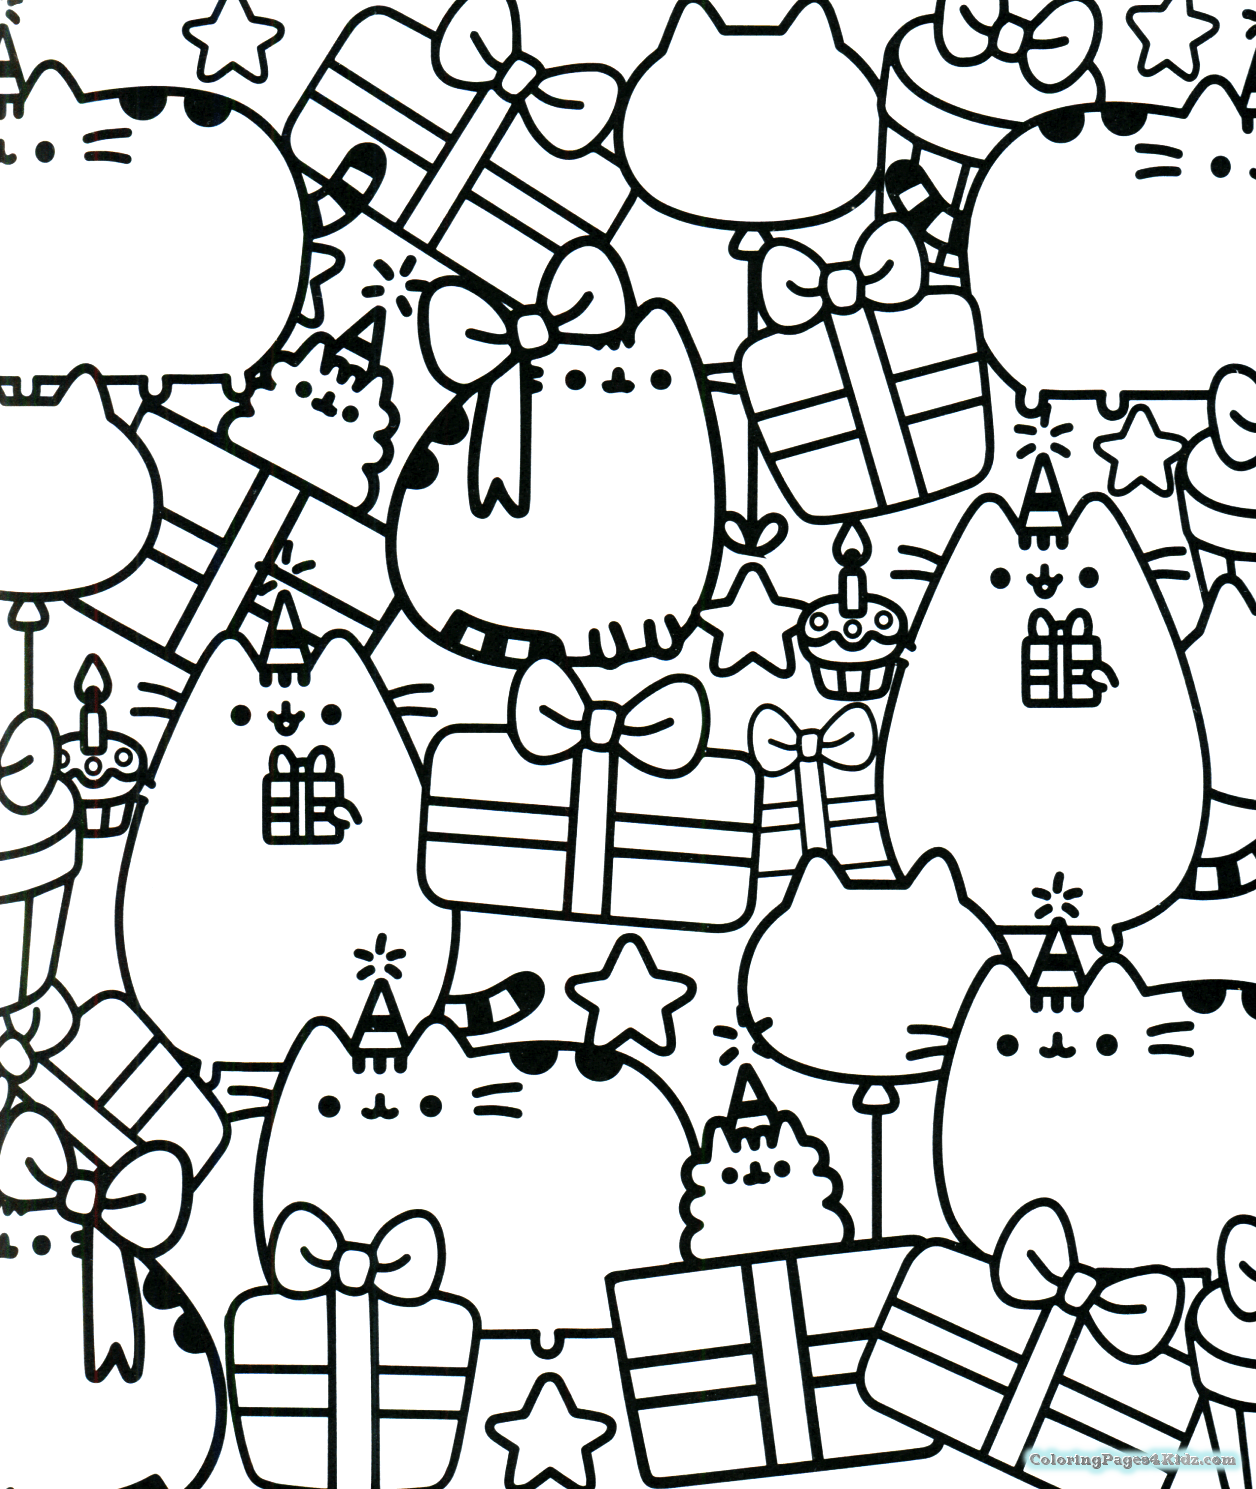 Tremendous Pusheen Cat Coloring Sheet Free Printable Taco Halloween Pages  Black Pig Page Weiner – Stephenbenedictdyson